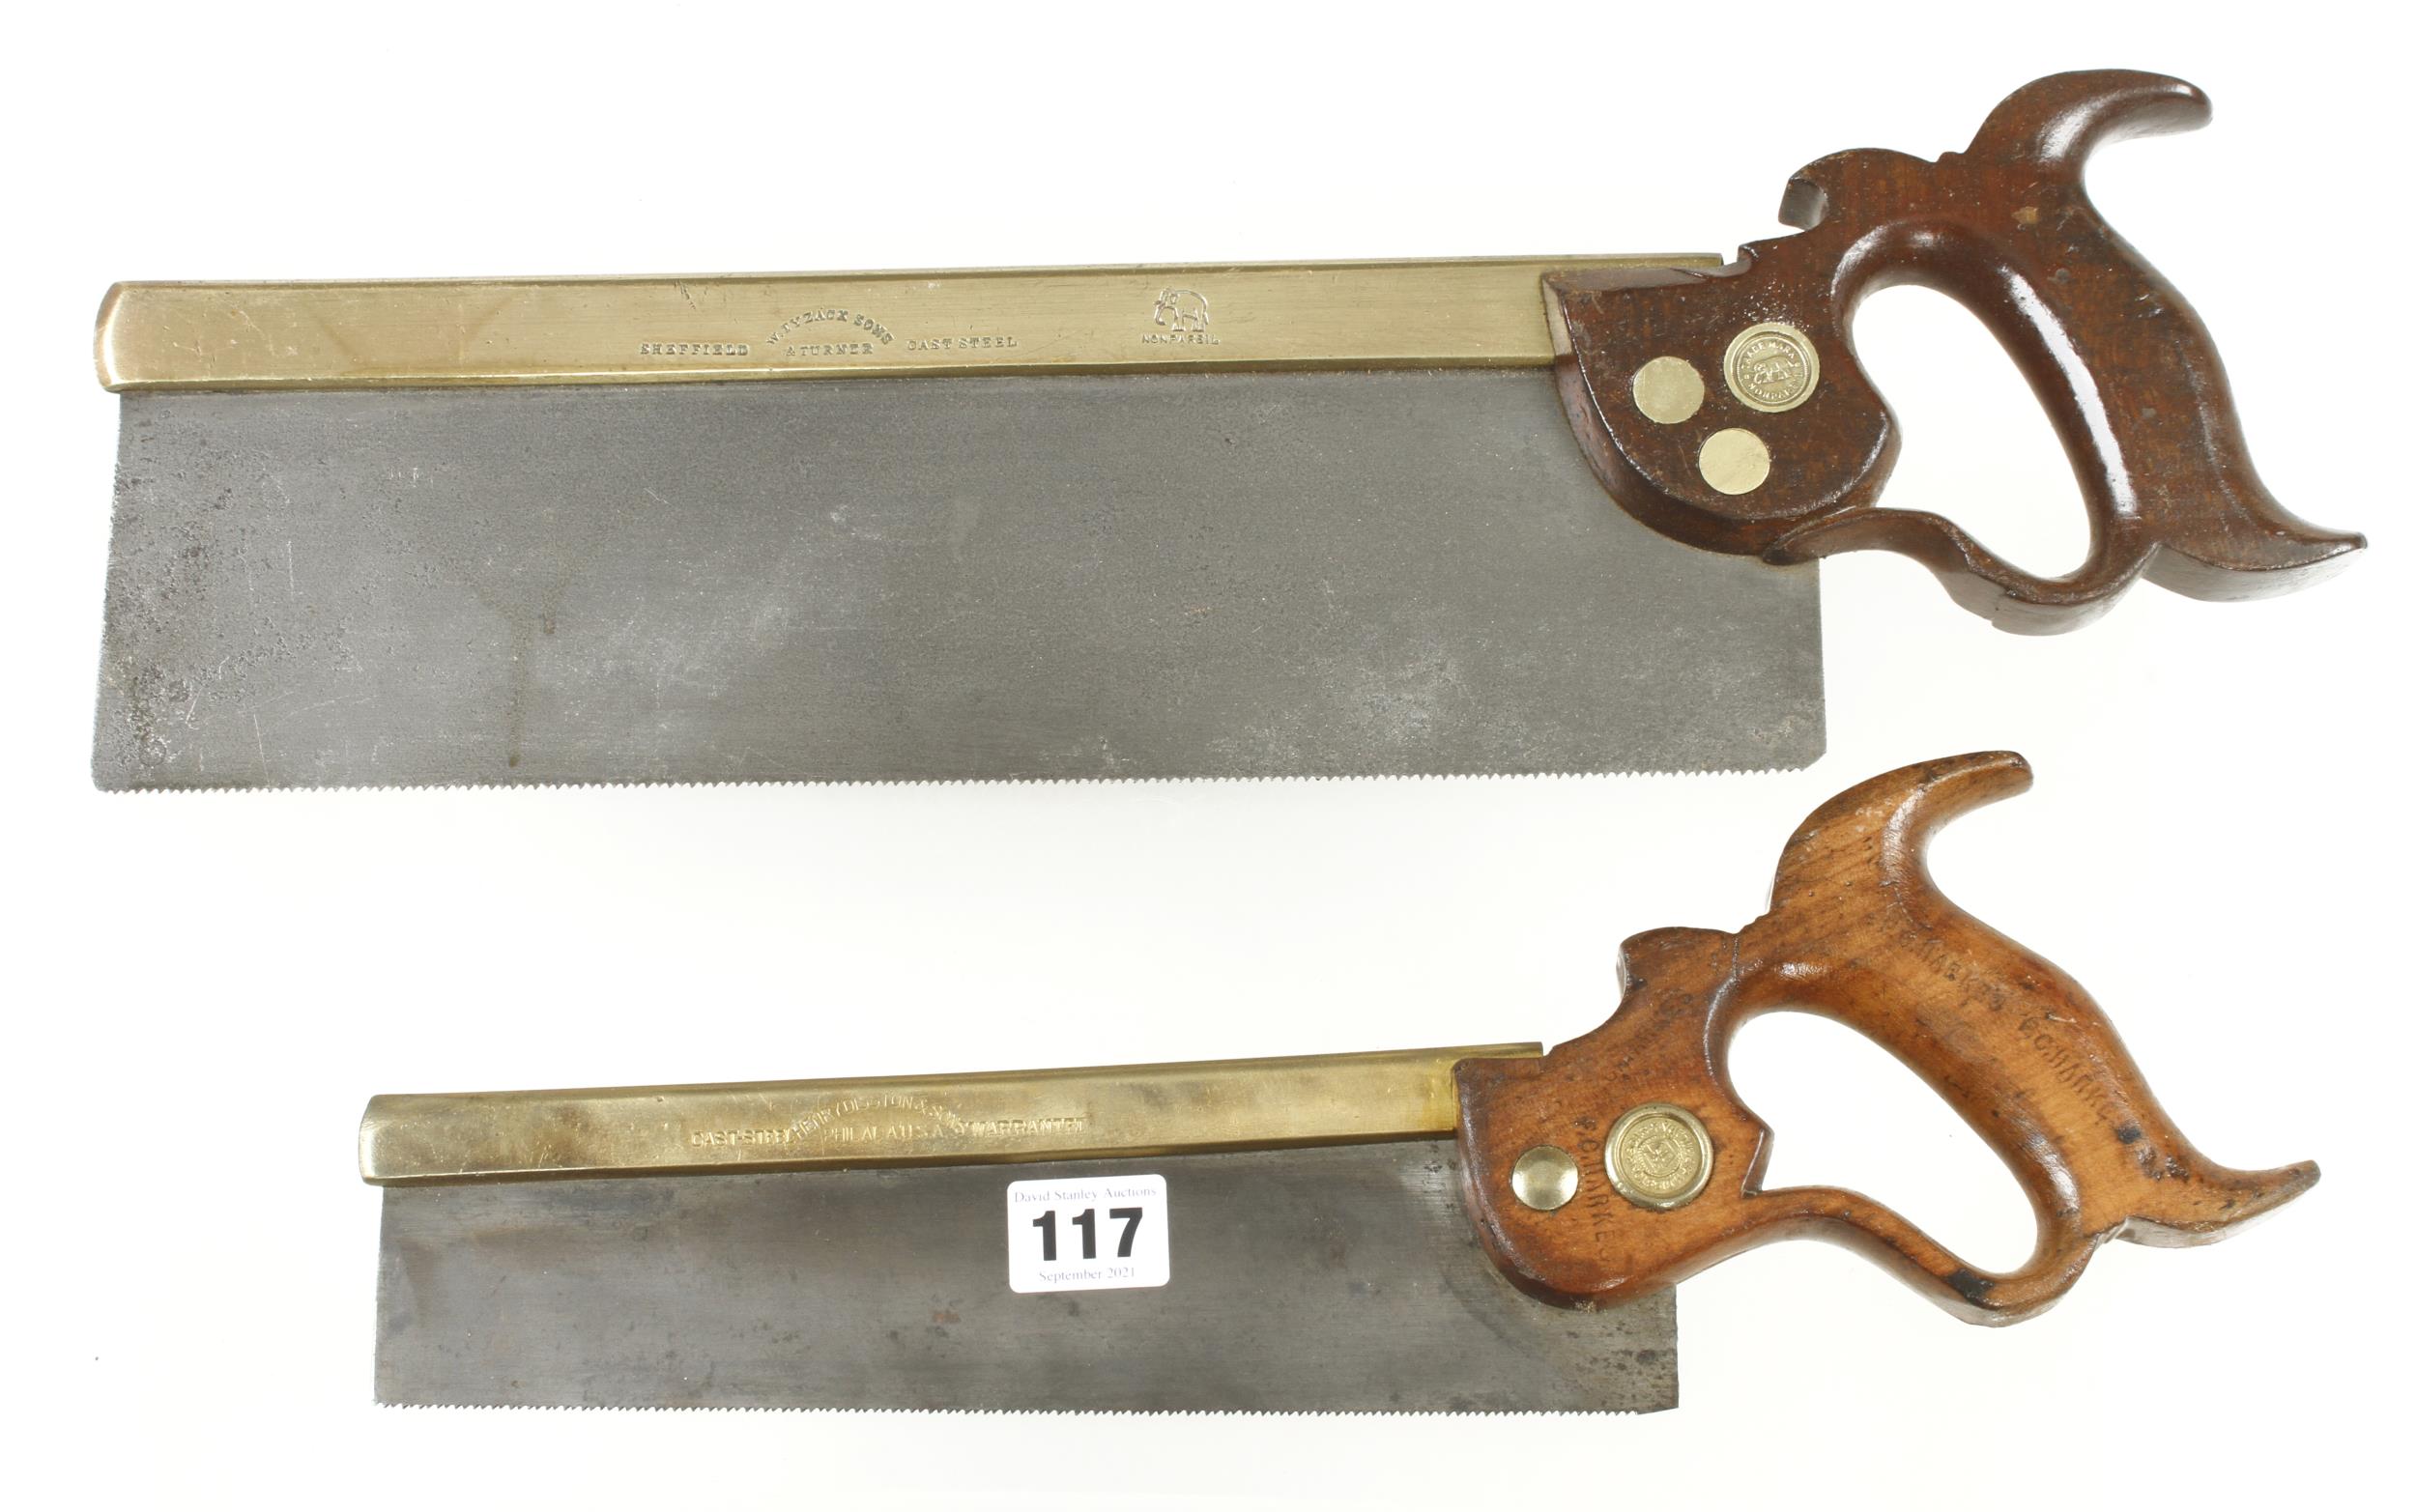 B/B tenon and dovetail saws by DISSTON and TYZACK G+